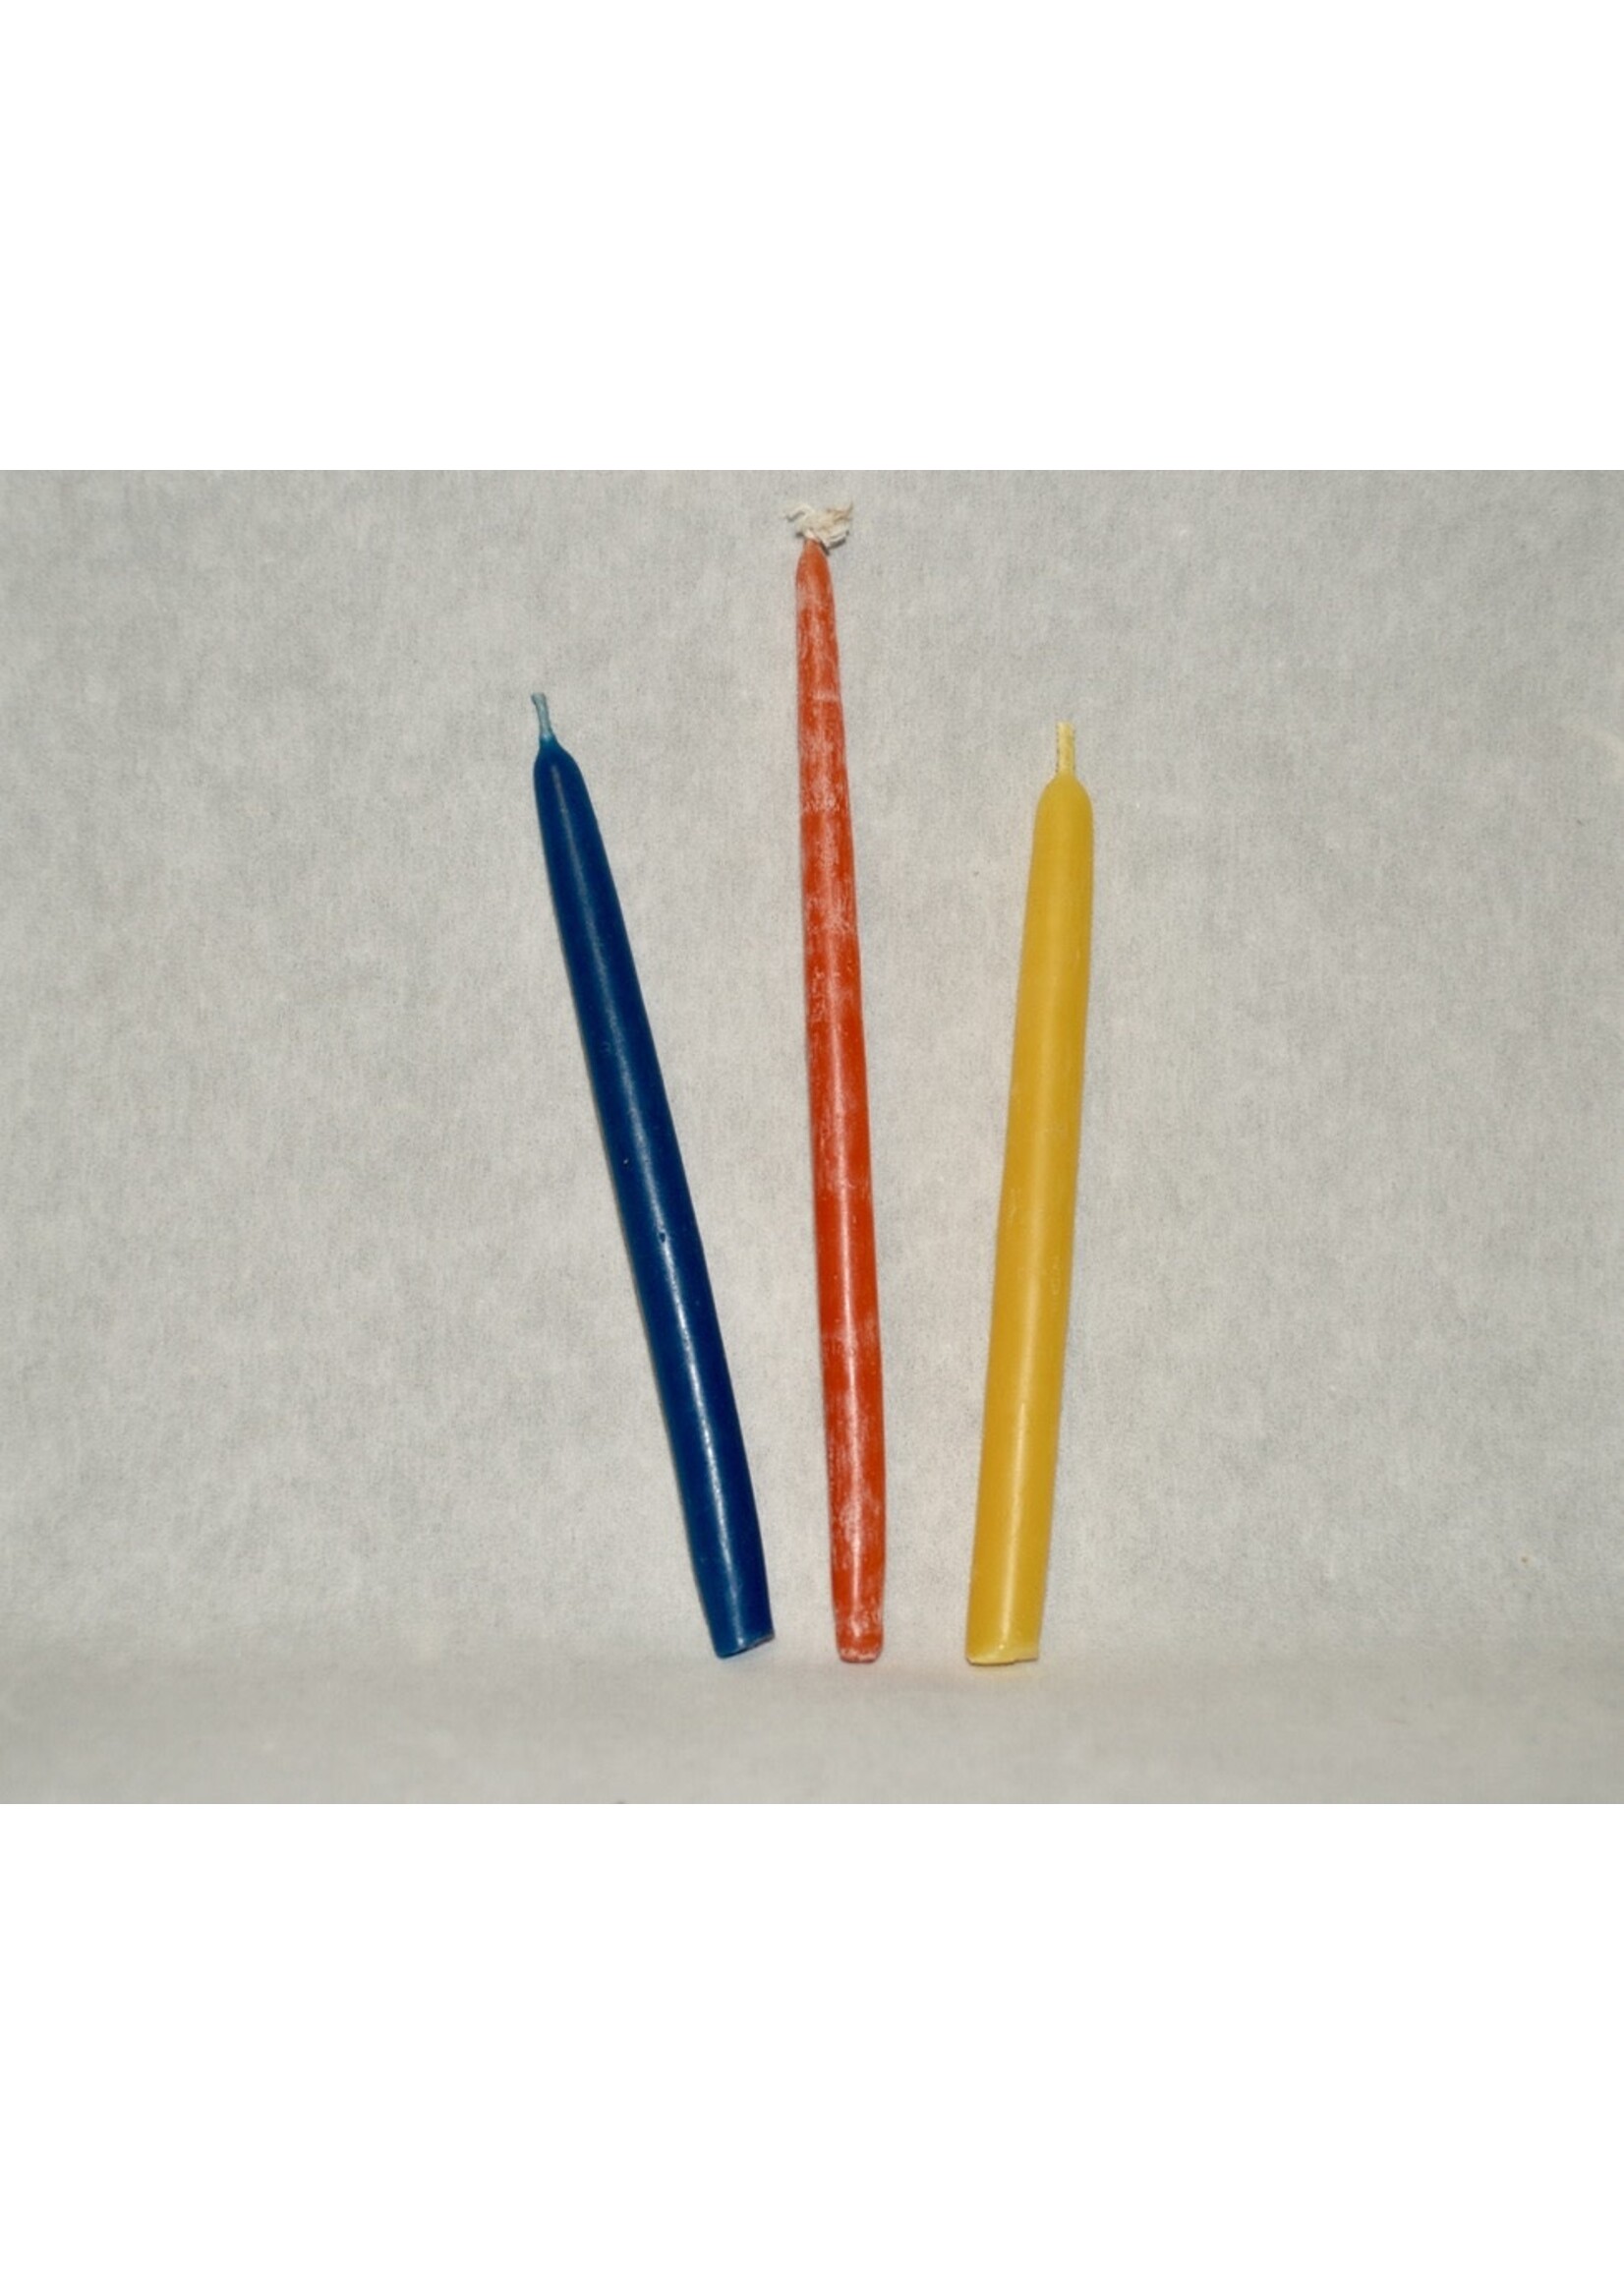 100% Pure Beeswax Chime Candles - Various Colors